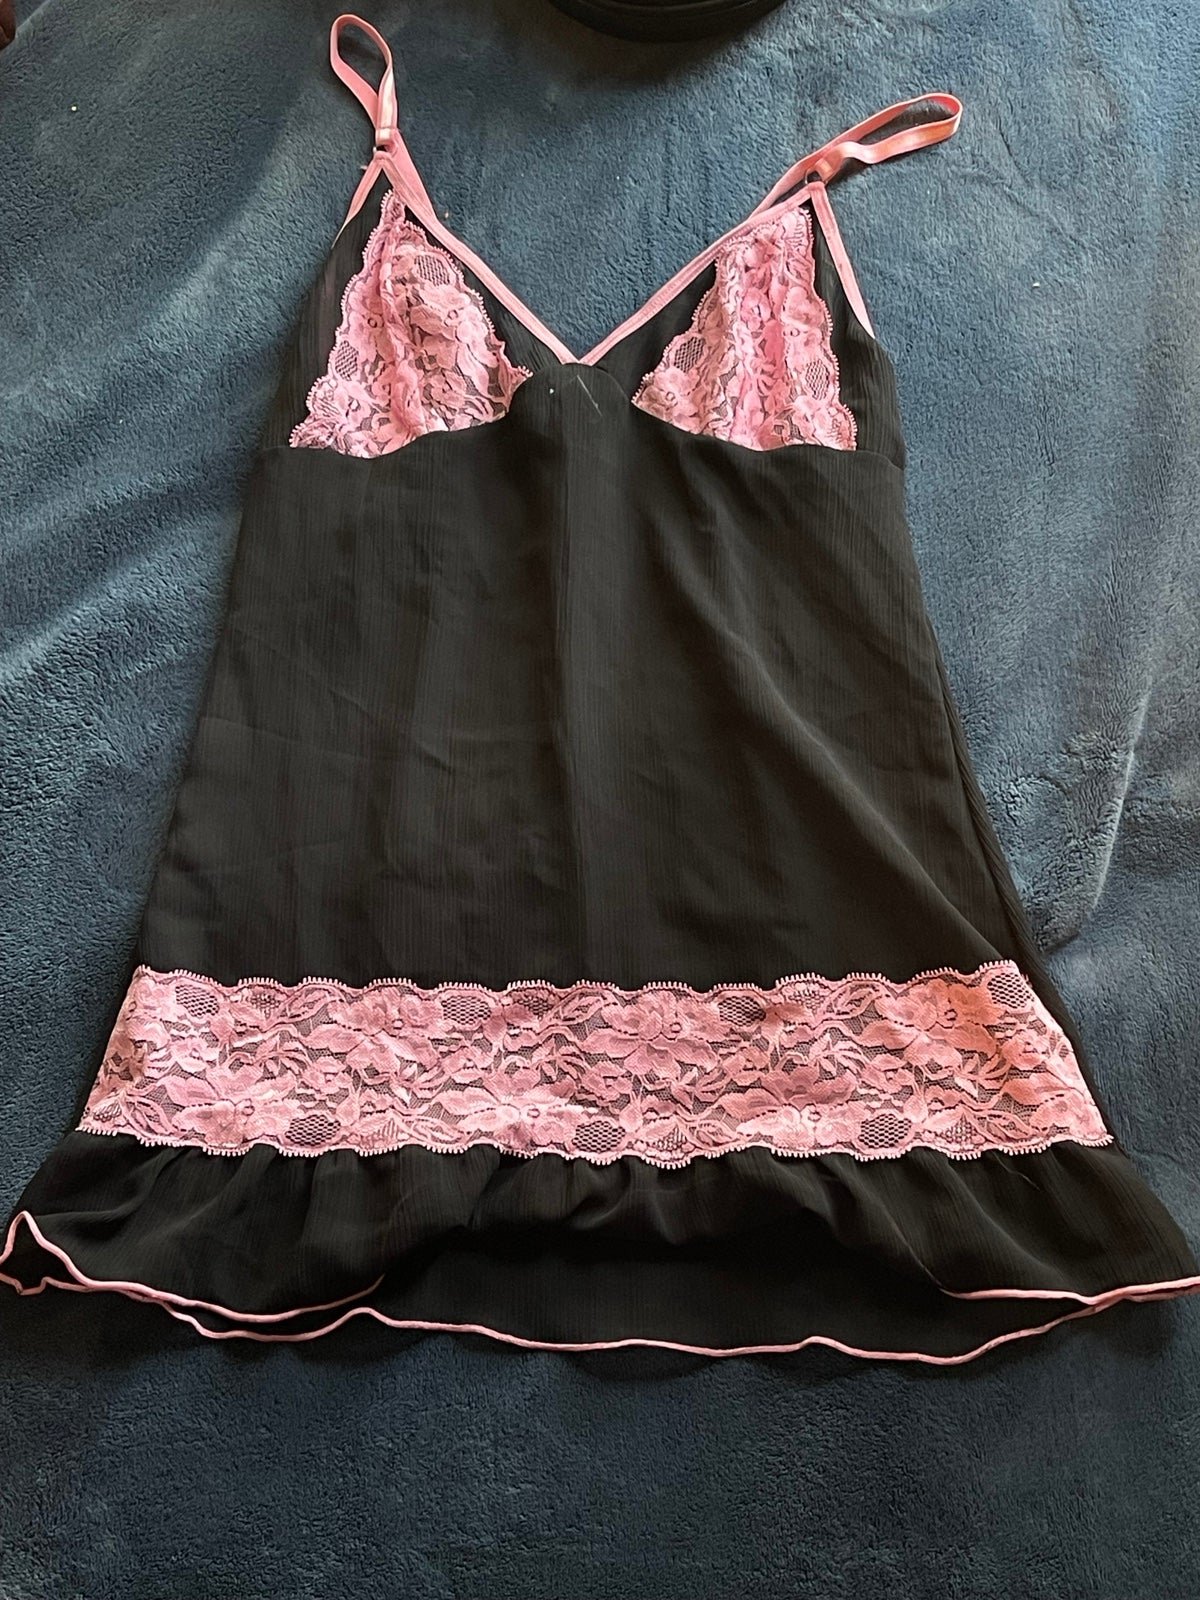 Gorgeous black and pink lace slip top KCGfQLRE1 Online 